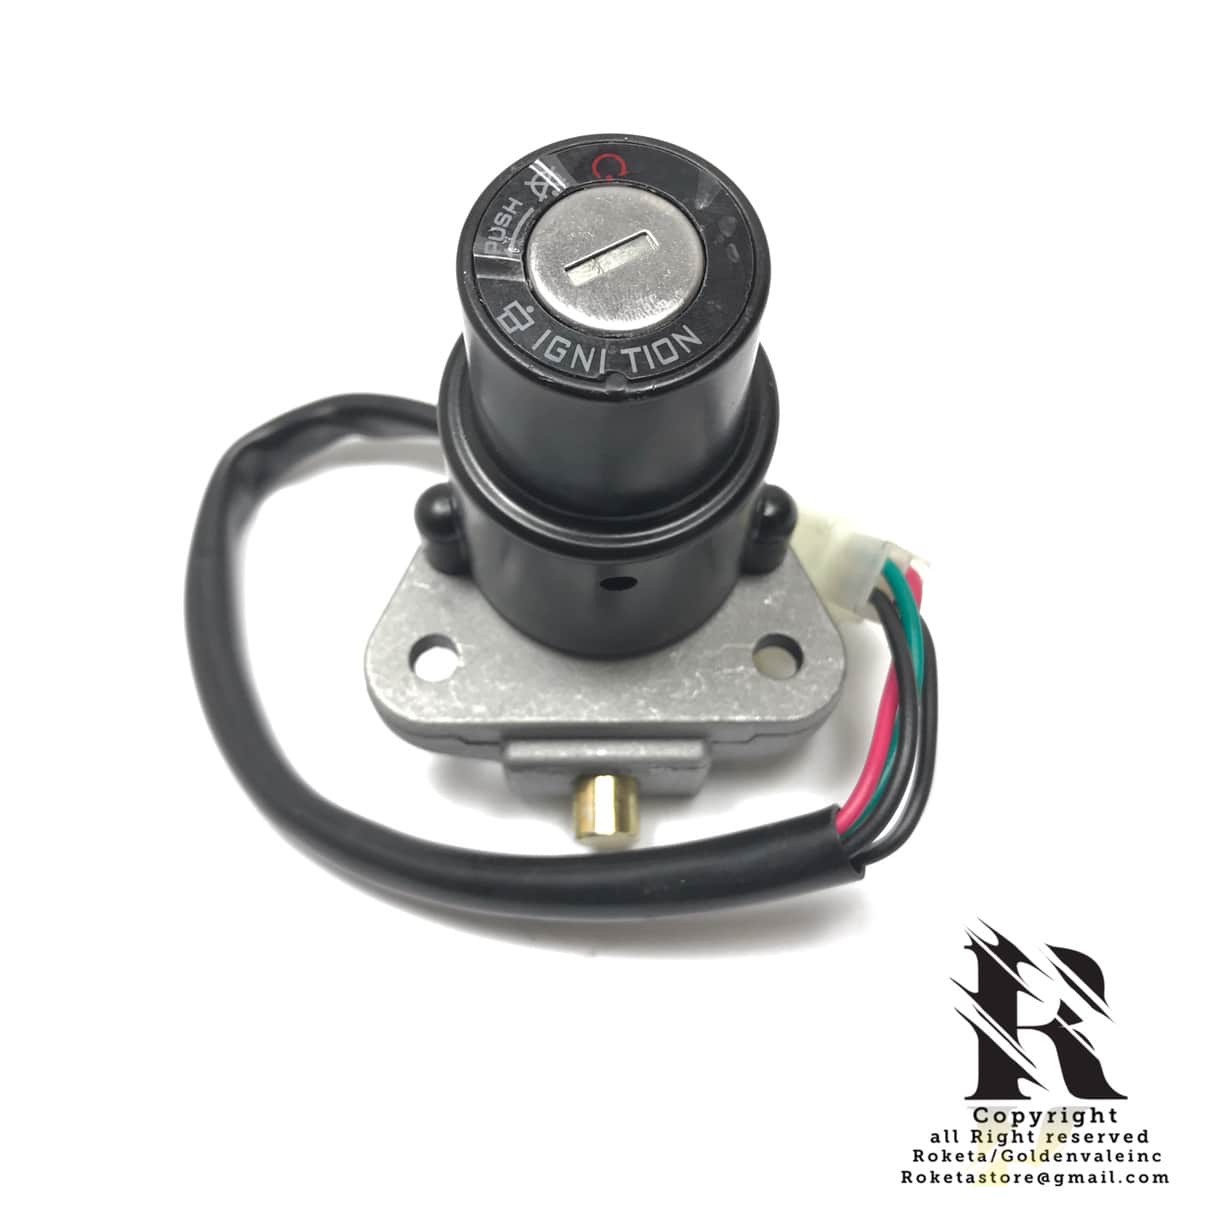 4 WIRES IGNITION SWITCH WITH 2 KEY > RoketaStore